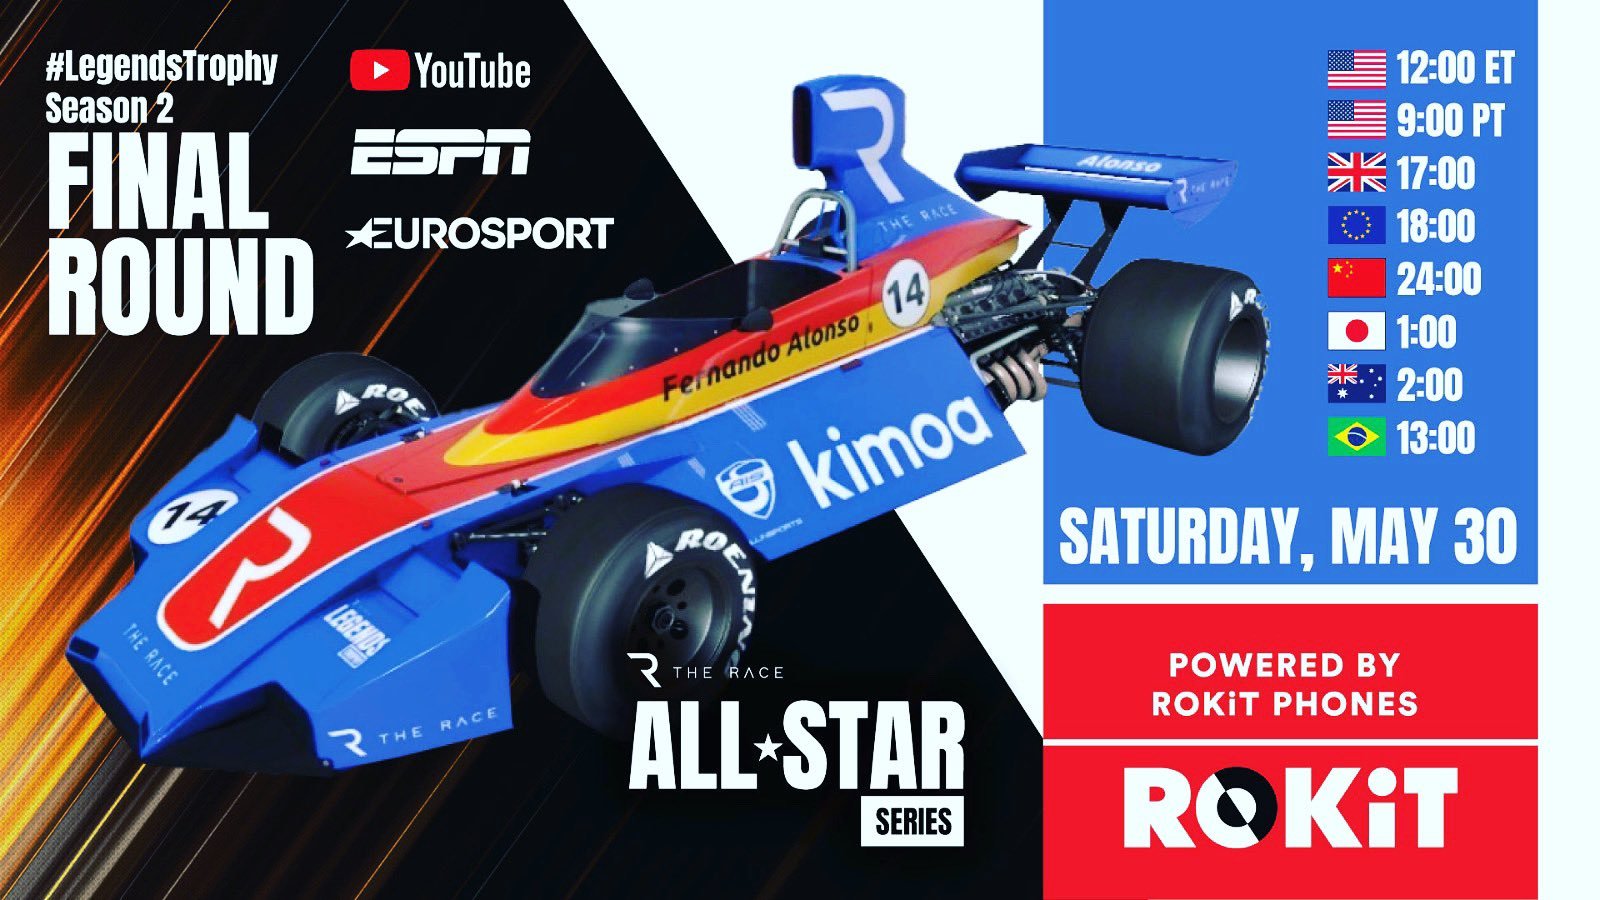 More information about "The Race All-Star Series: torneo online con le leggende [30 Maggio ore 18]"